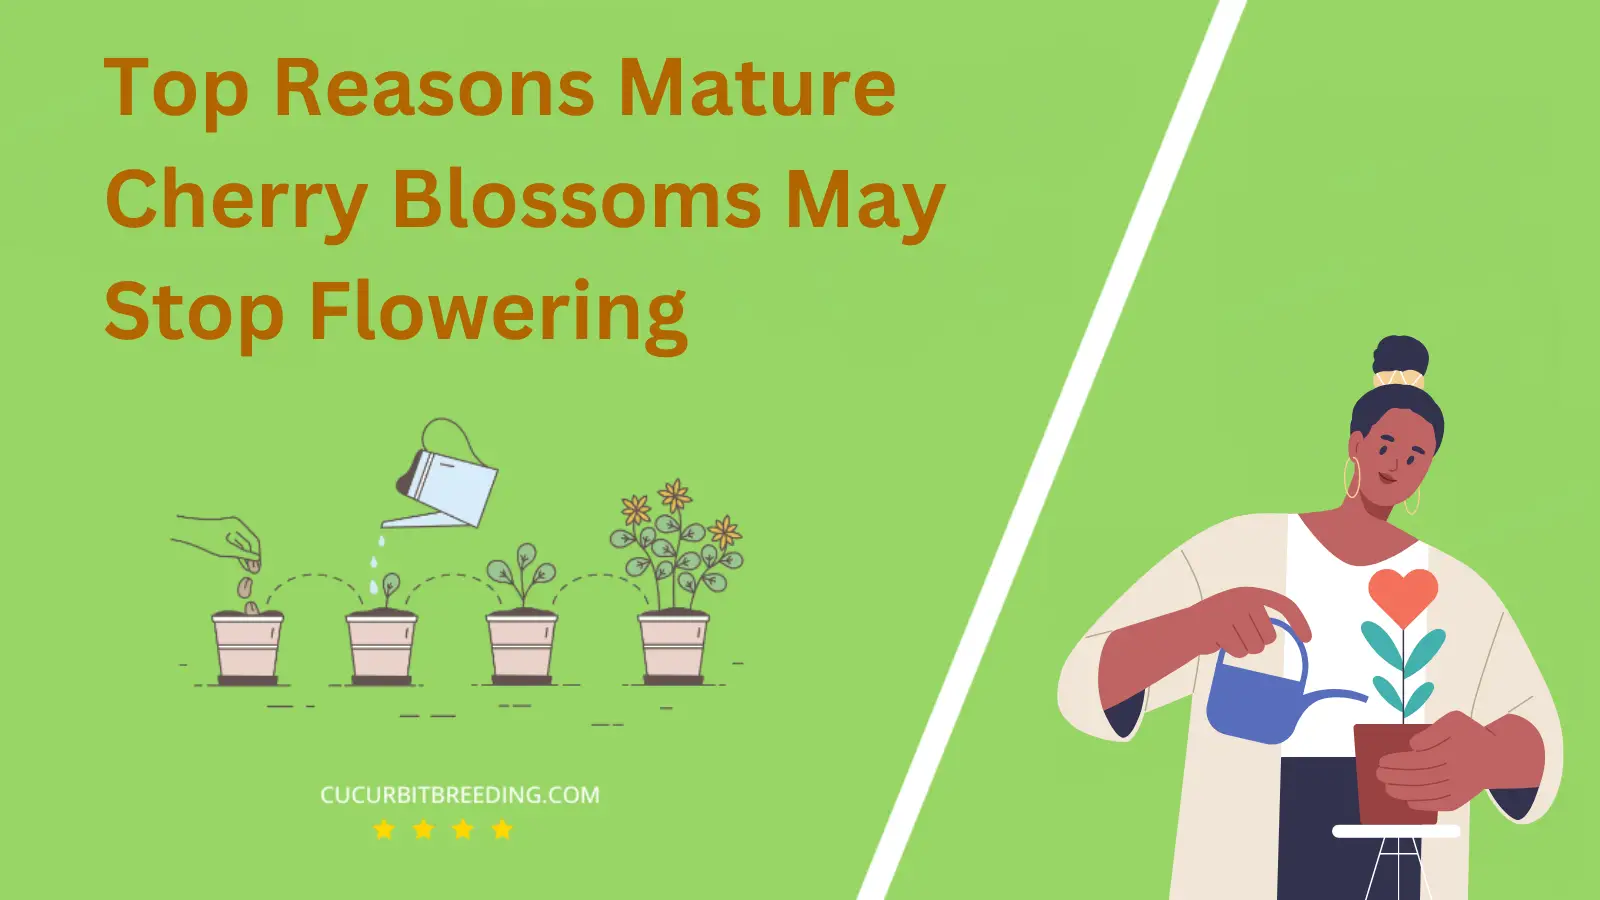 Top Reasons Mature Cherry Blossoms May Stop Flowering